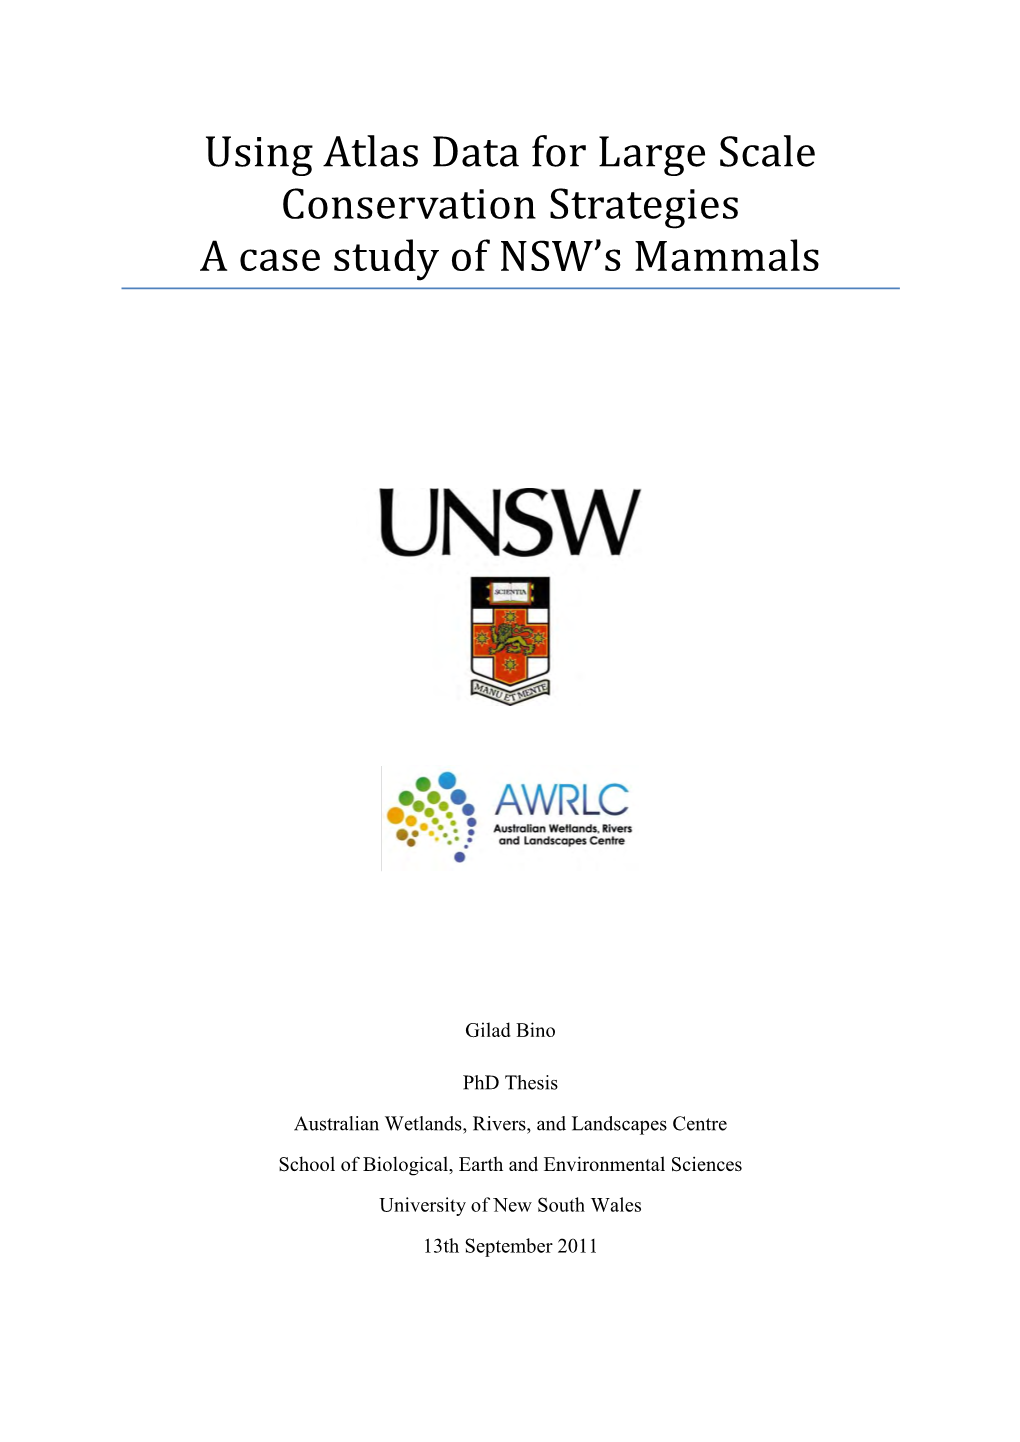 Using Atlas Data for Large Scale Conservation Strategies a Case Study of NSW’S Mammals